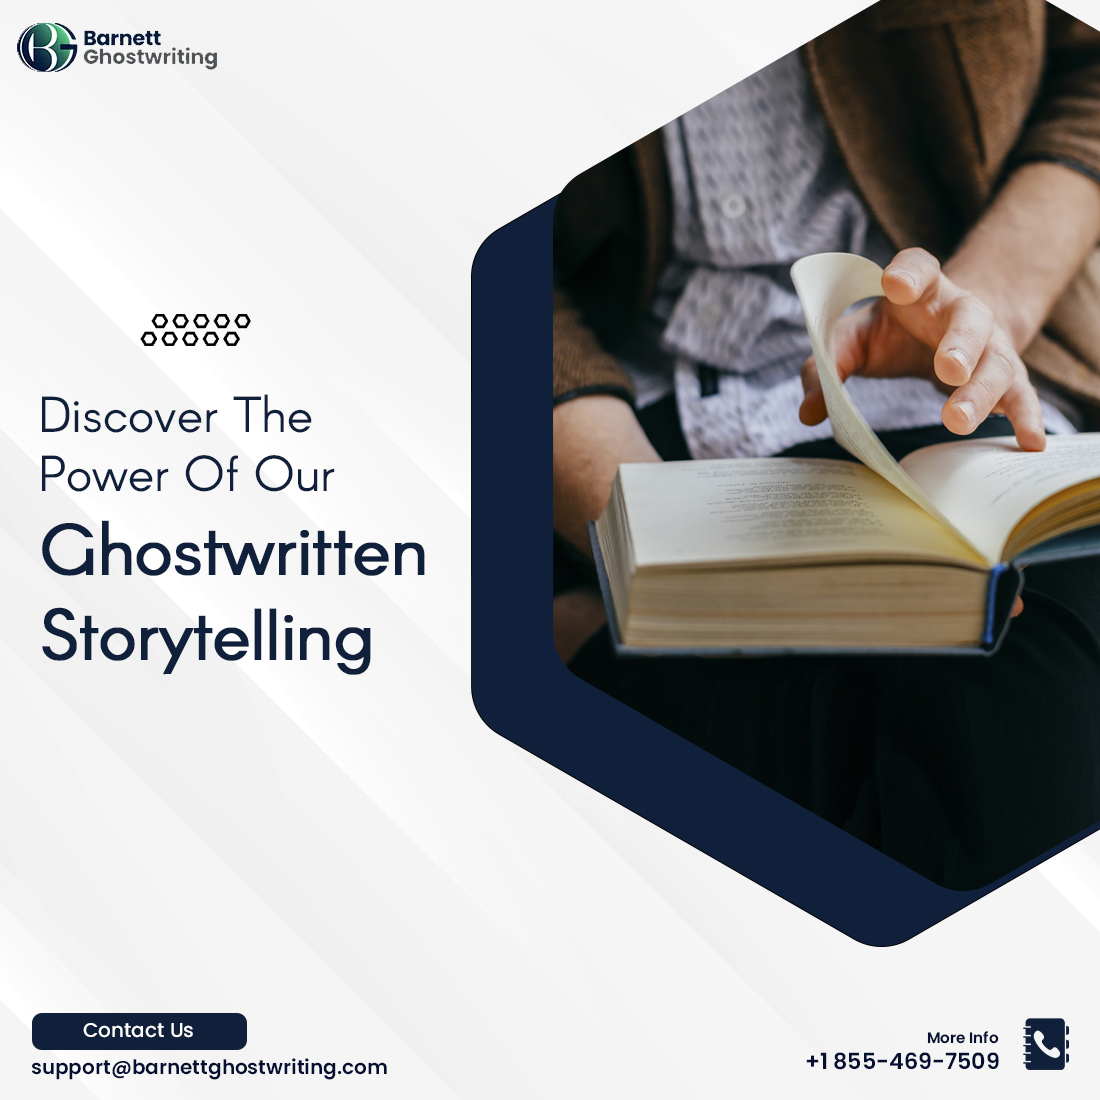 At Barnett Ghostwriting, we understand the power of storytelling. Our ghostwritten stories have captivated readers and left a lasting impact.
Visit us now! ⬇️
barnettghostwriting.com

#BarnettGhostwriting  #ghostwrittenstories #professionalghostwriting #ghostwritingagency